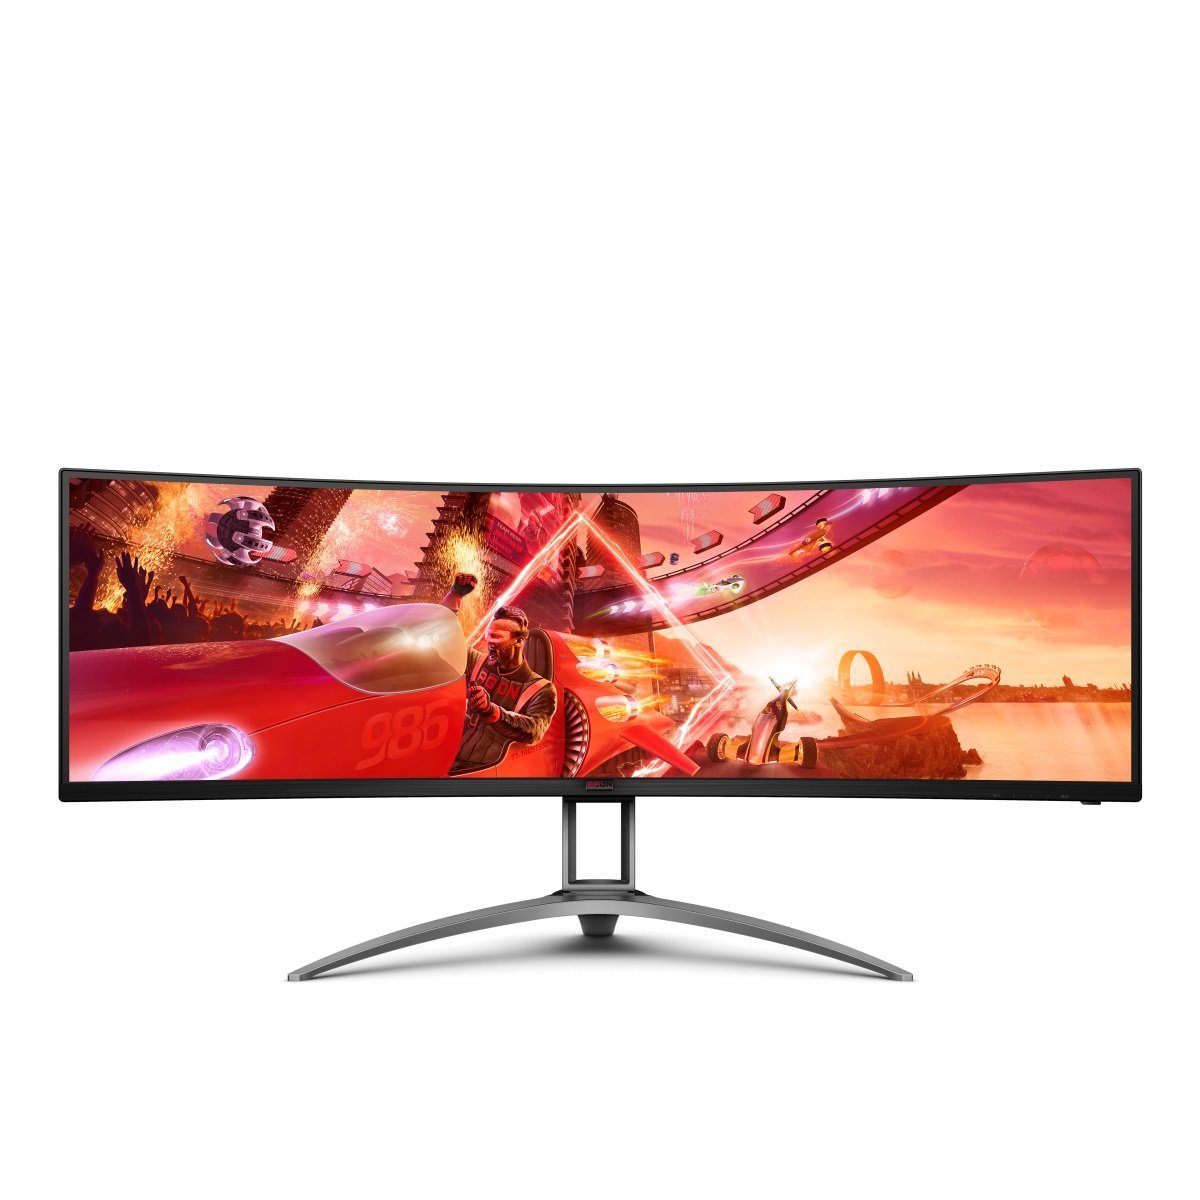 AOC AG493UCX2 Curved-Gaming-Monitor (124 cm/49 